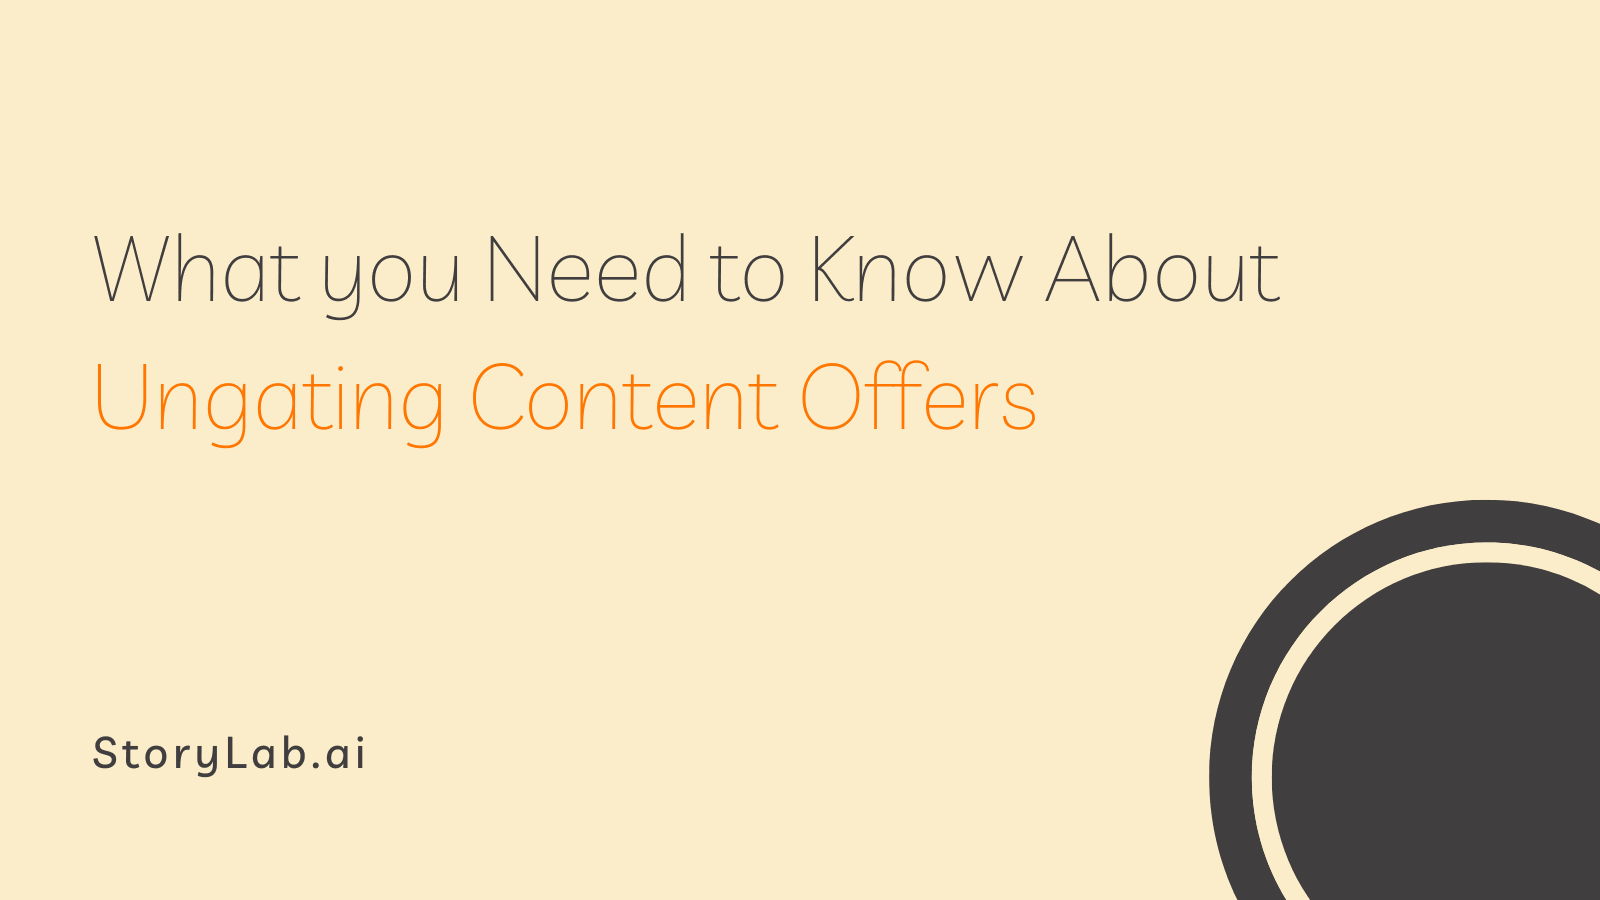 What you Need to Know About Ungating Content Offers